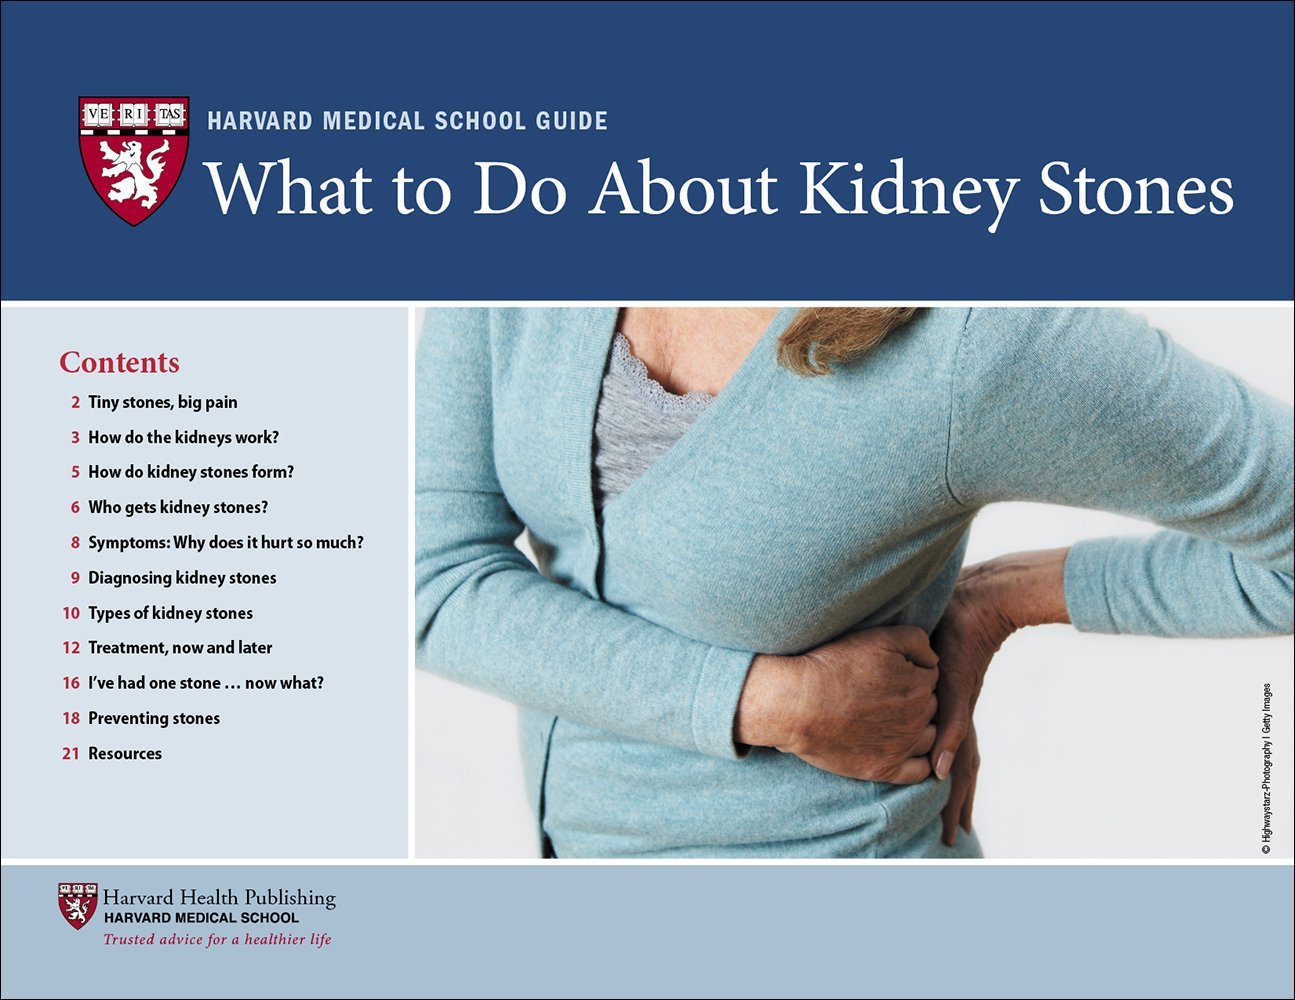 What to Do About Kidney Stones